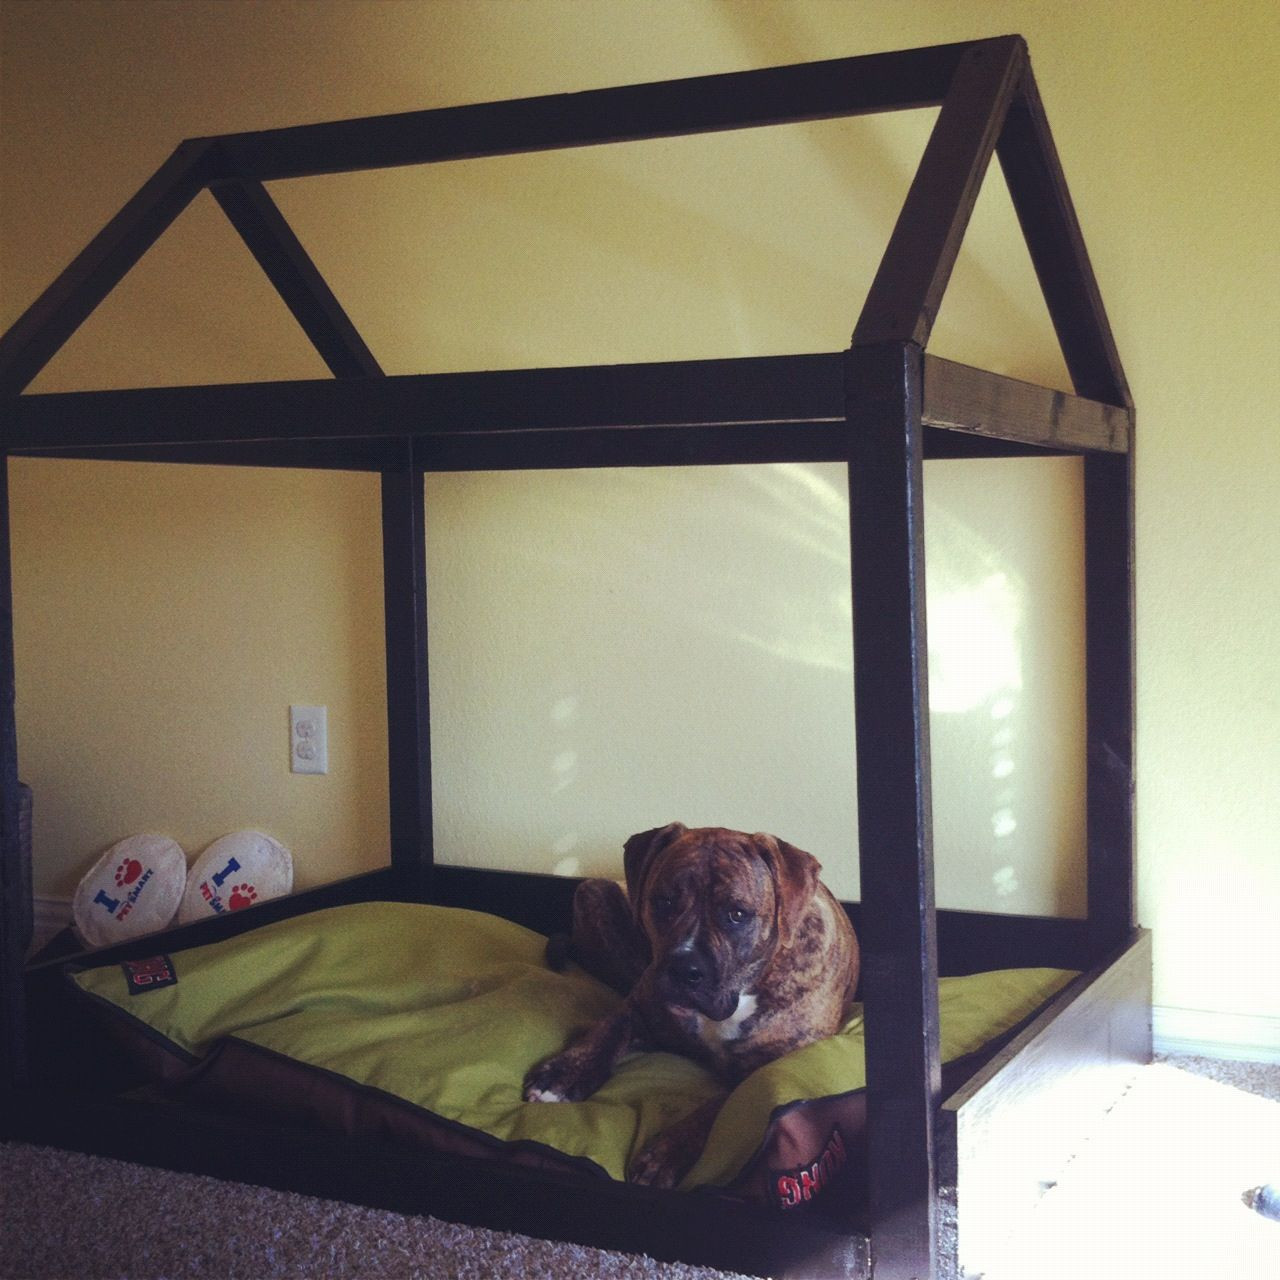 DIY Outdoor Dog Bed
 DIY Dog Bed I would add a "ceiling" and cover the roof